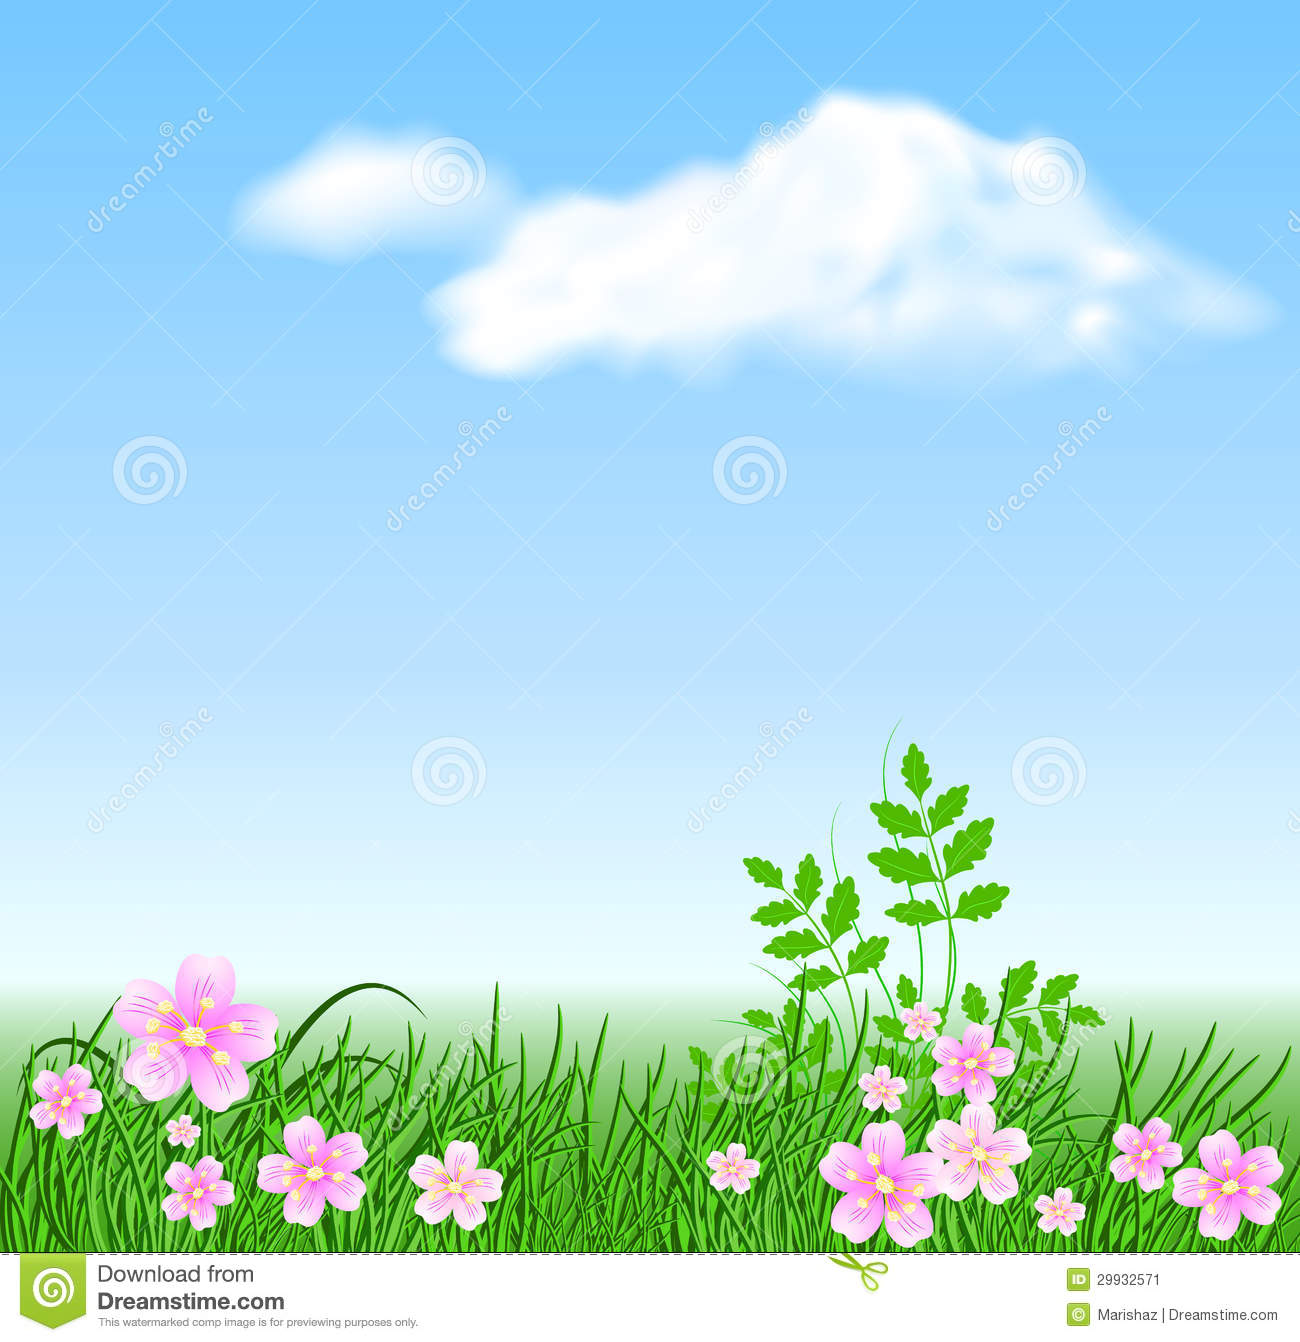 flower meadow clipart - photo #41